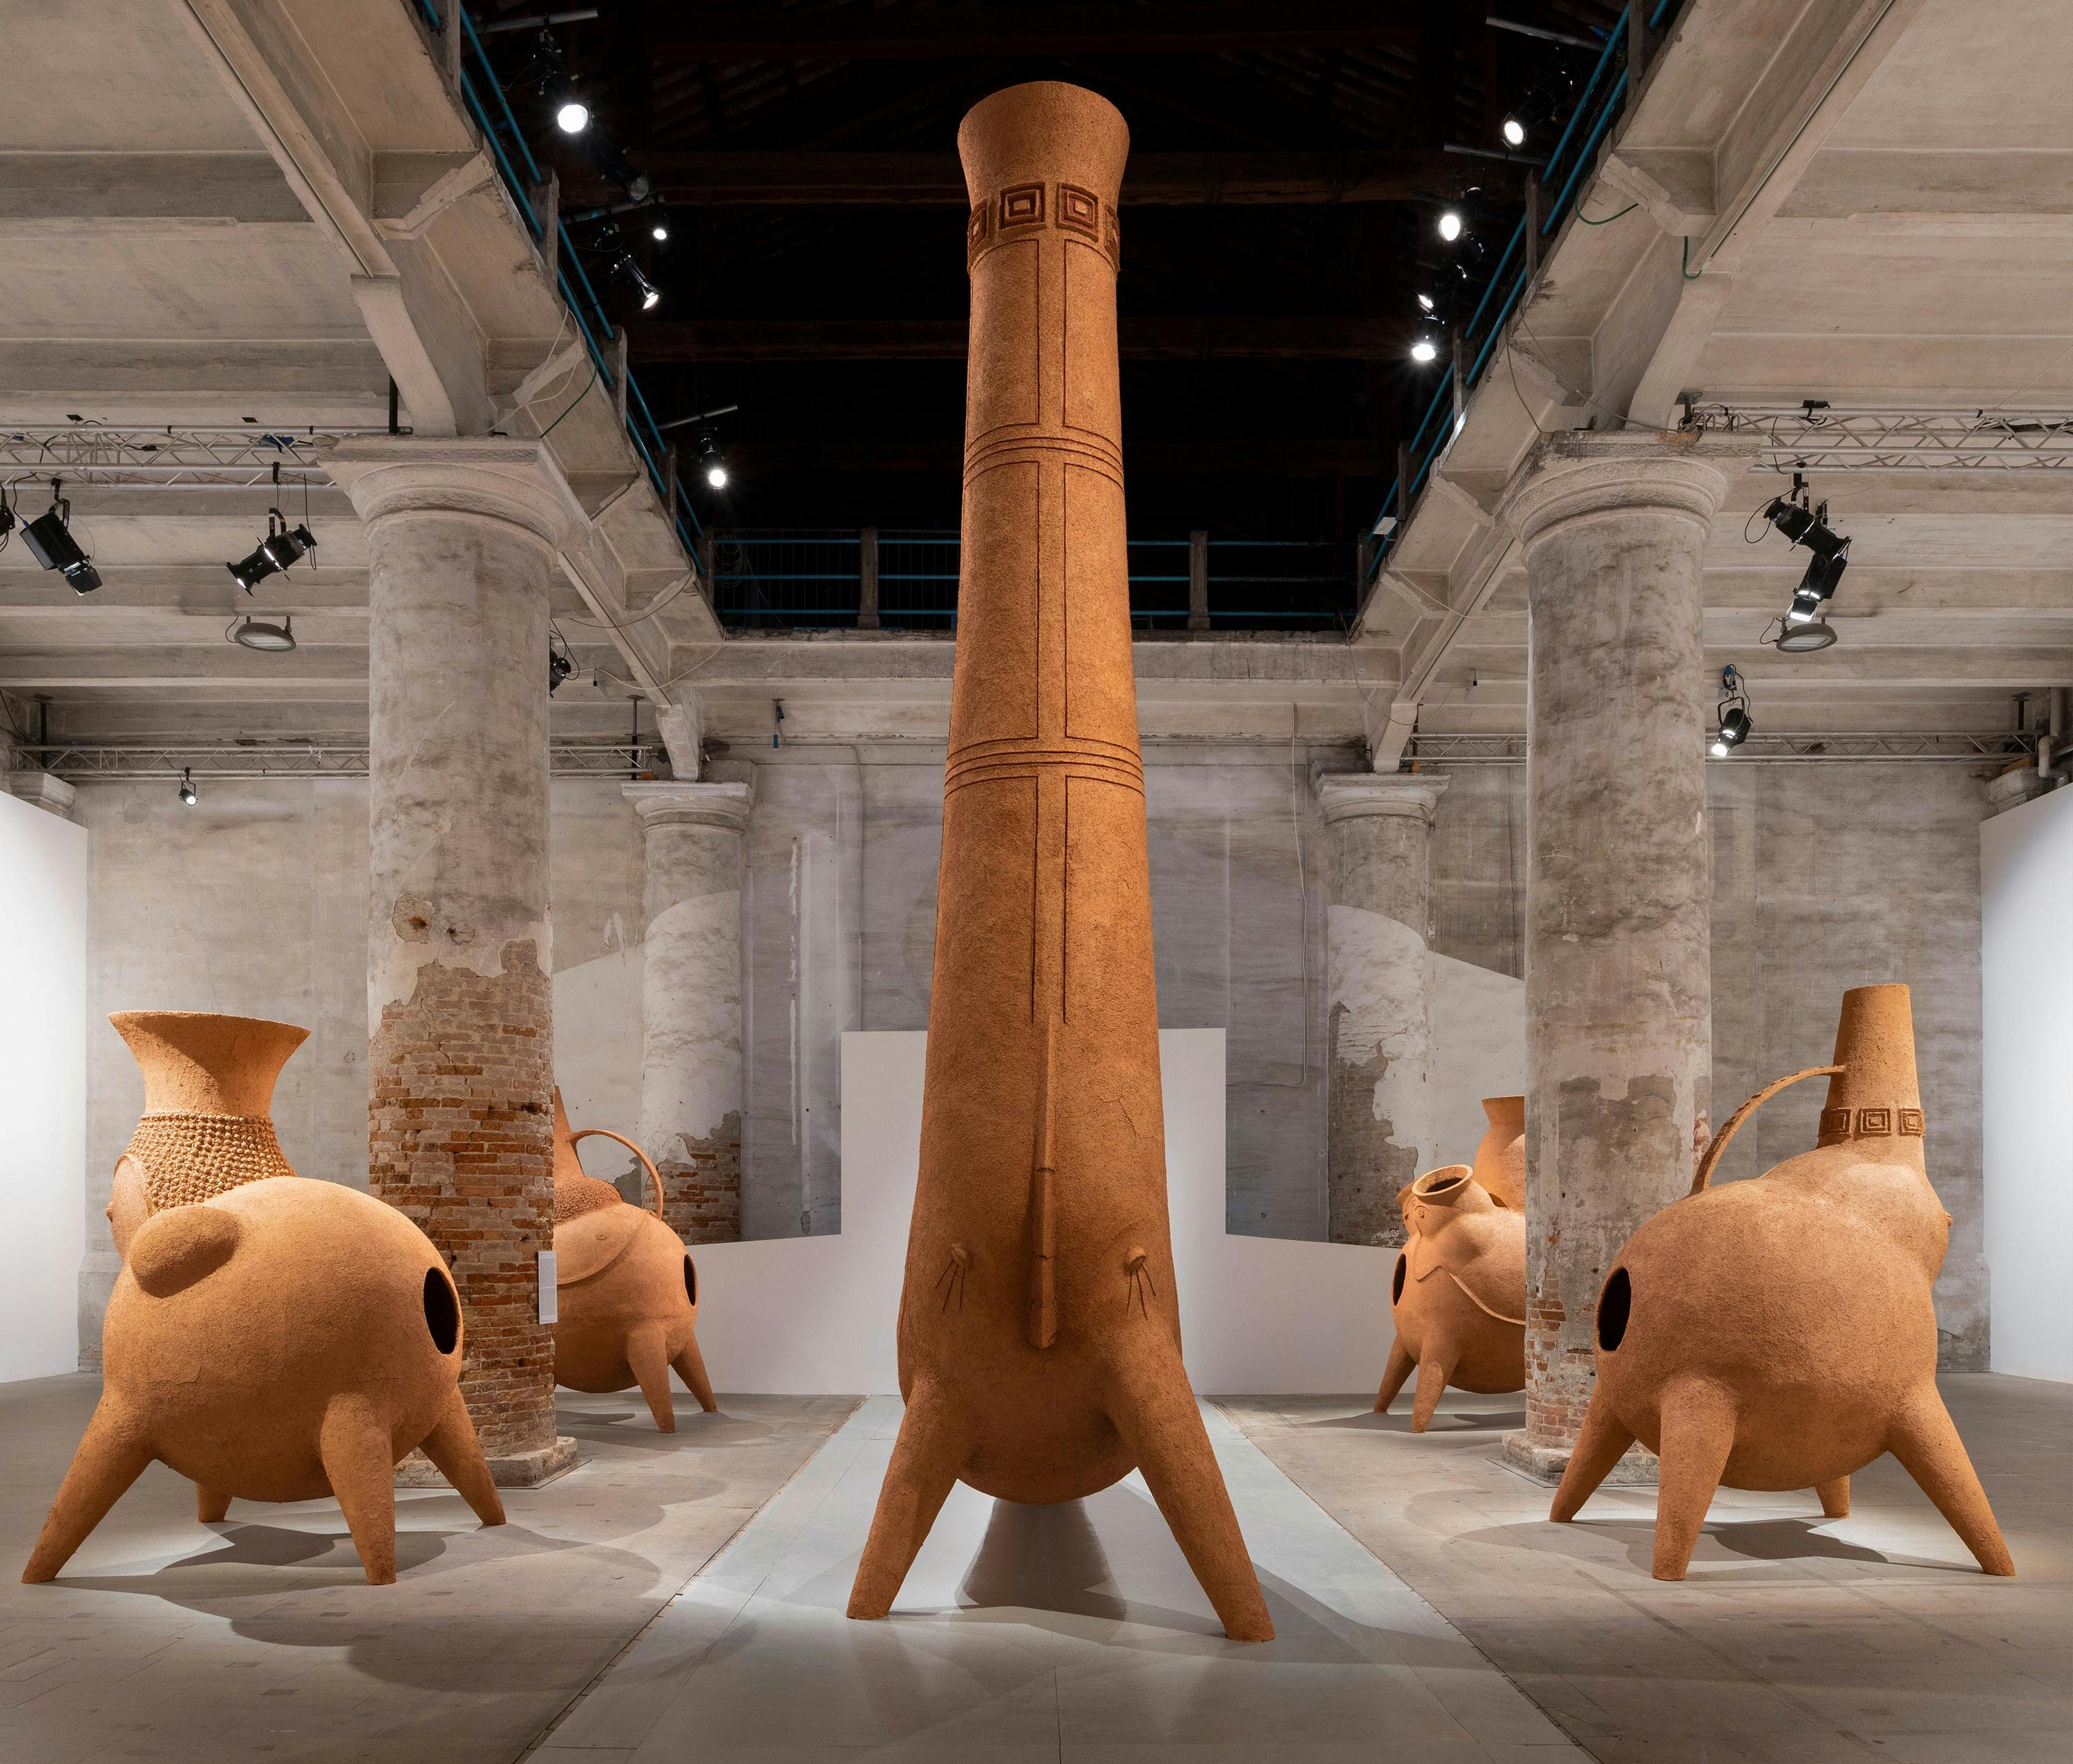 A towering vessel with legs, flanked by smaller and squatter clay ovens, in a gallery setting